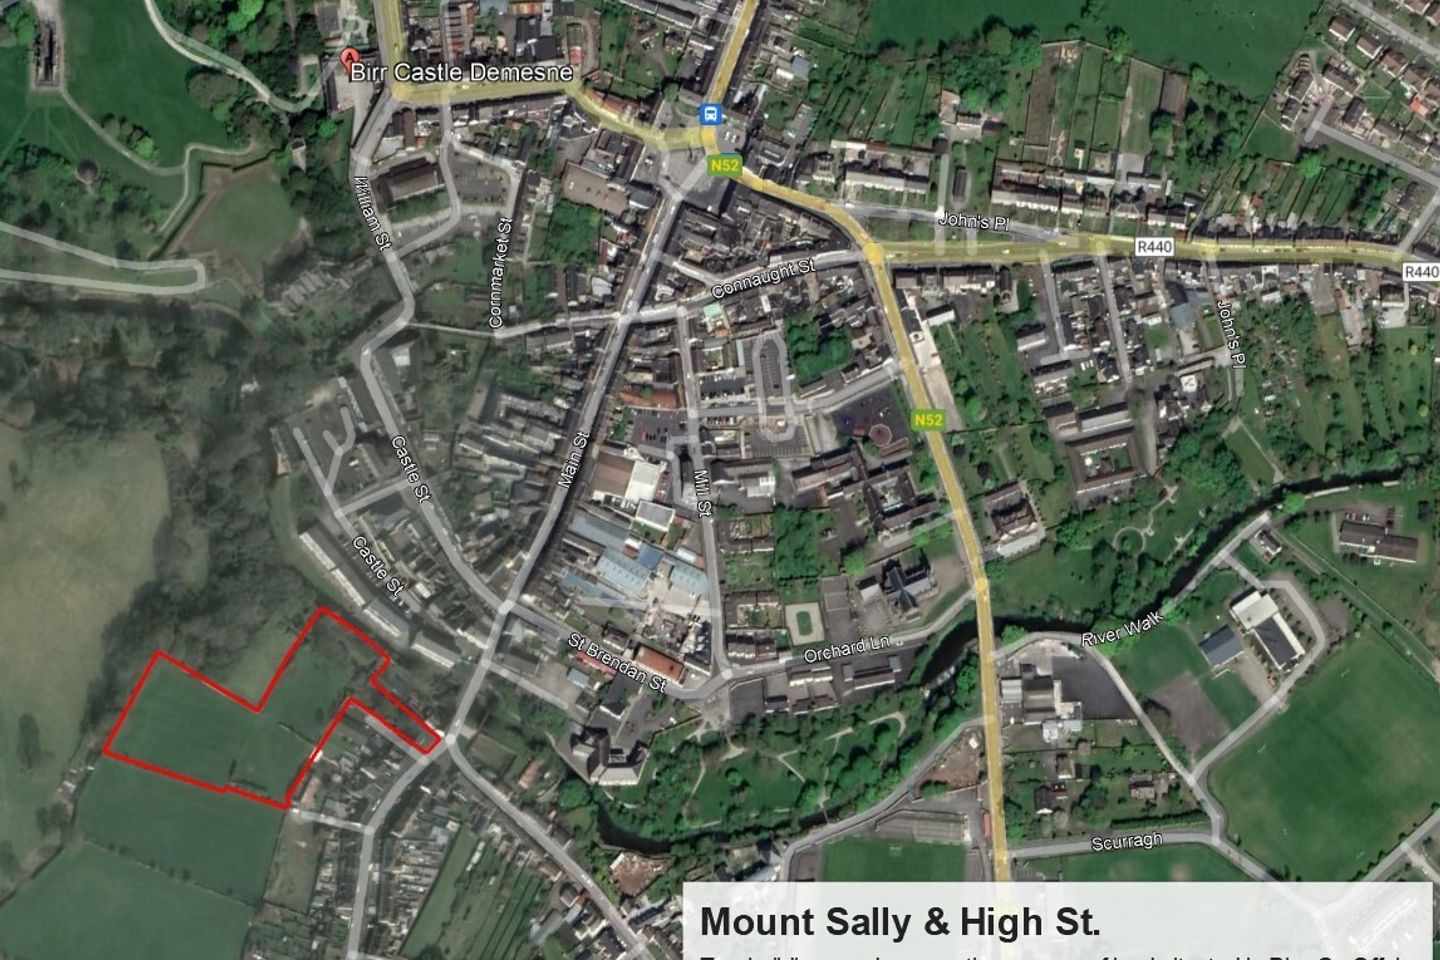 Two Buildings On Approx. 3 Acres, Mount Sally & High St., Townparks, Birr, Co. Offaly